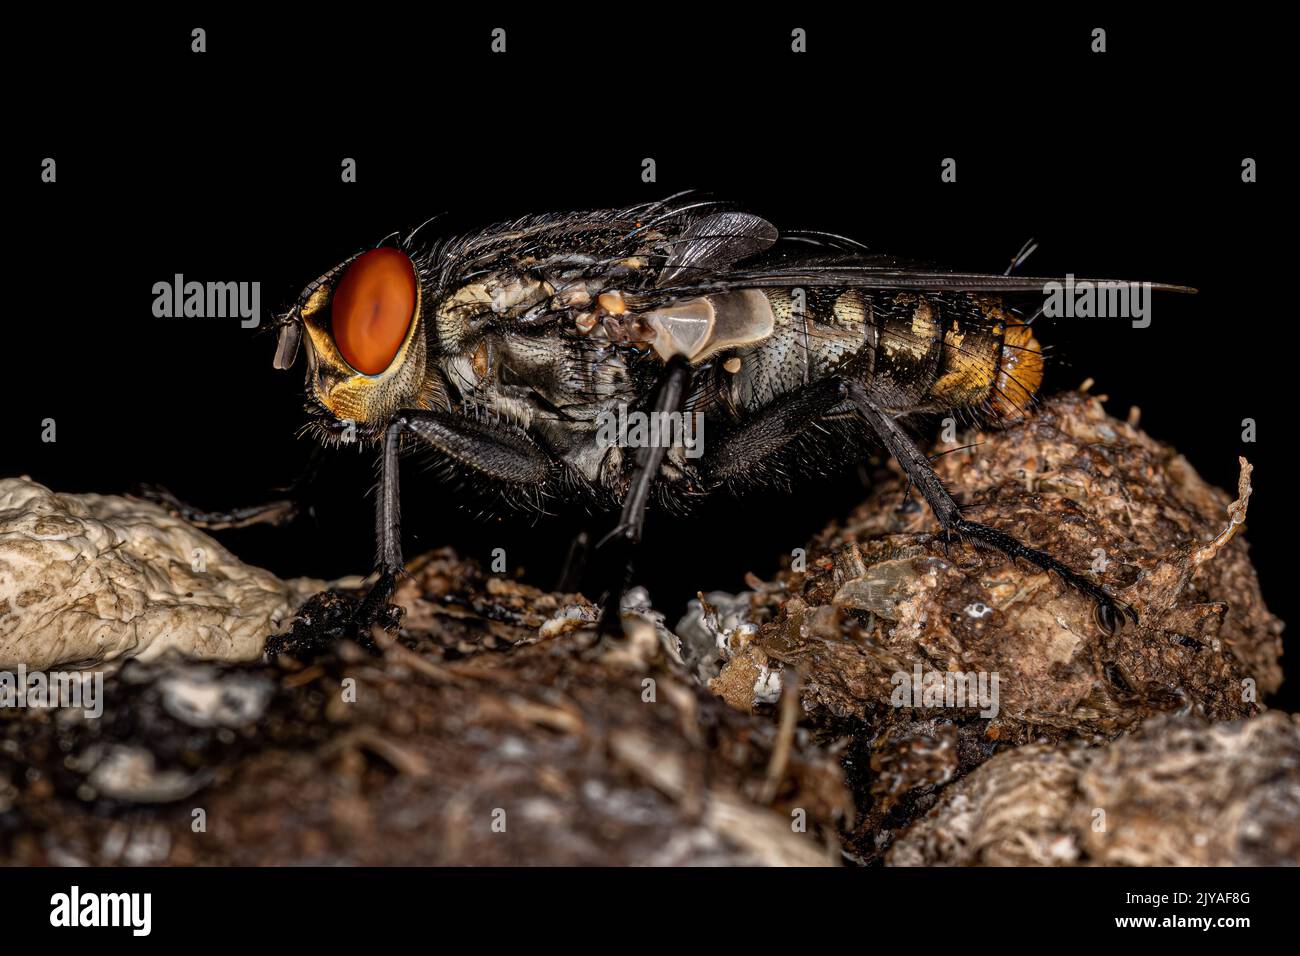 Adult Flesh Fly of the Family Sarcophagidae Stock Photo